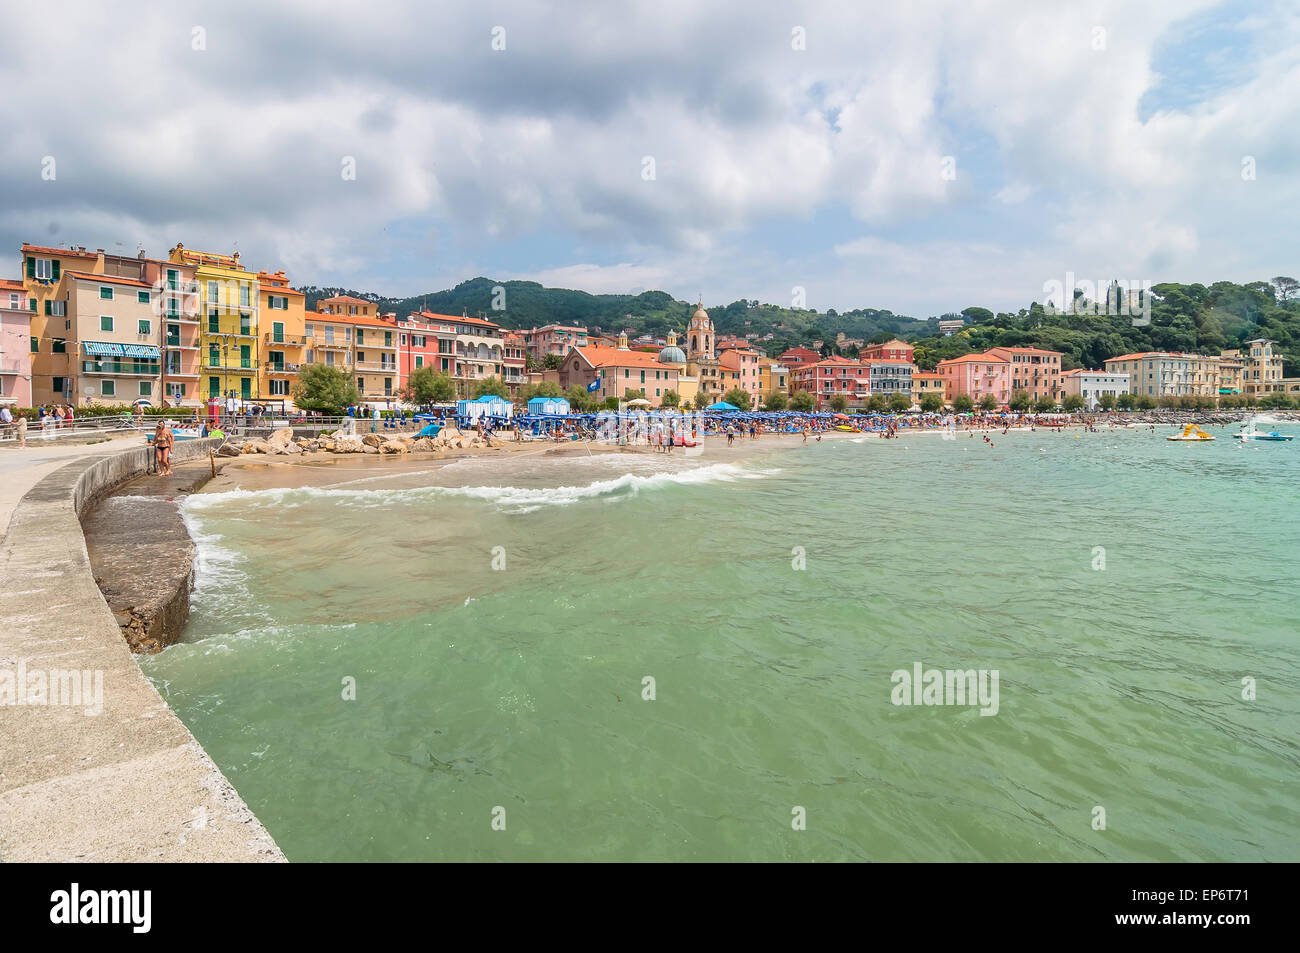 Lerici, Italy - June 29, 2014: locals and tourists enjoy San Terenzo beach and town in Lerici, Italy. Lerici is located in La Sp Stock Photo